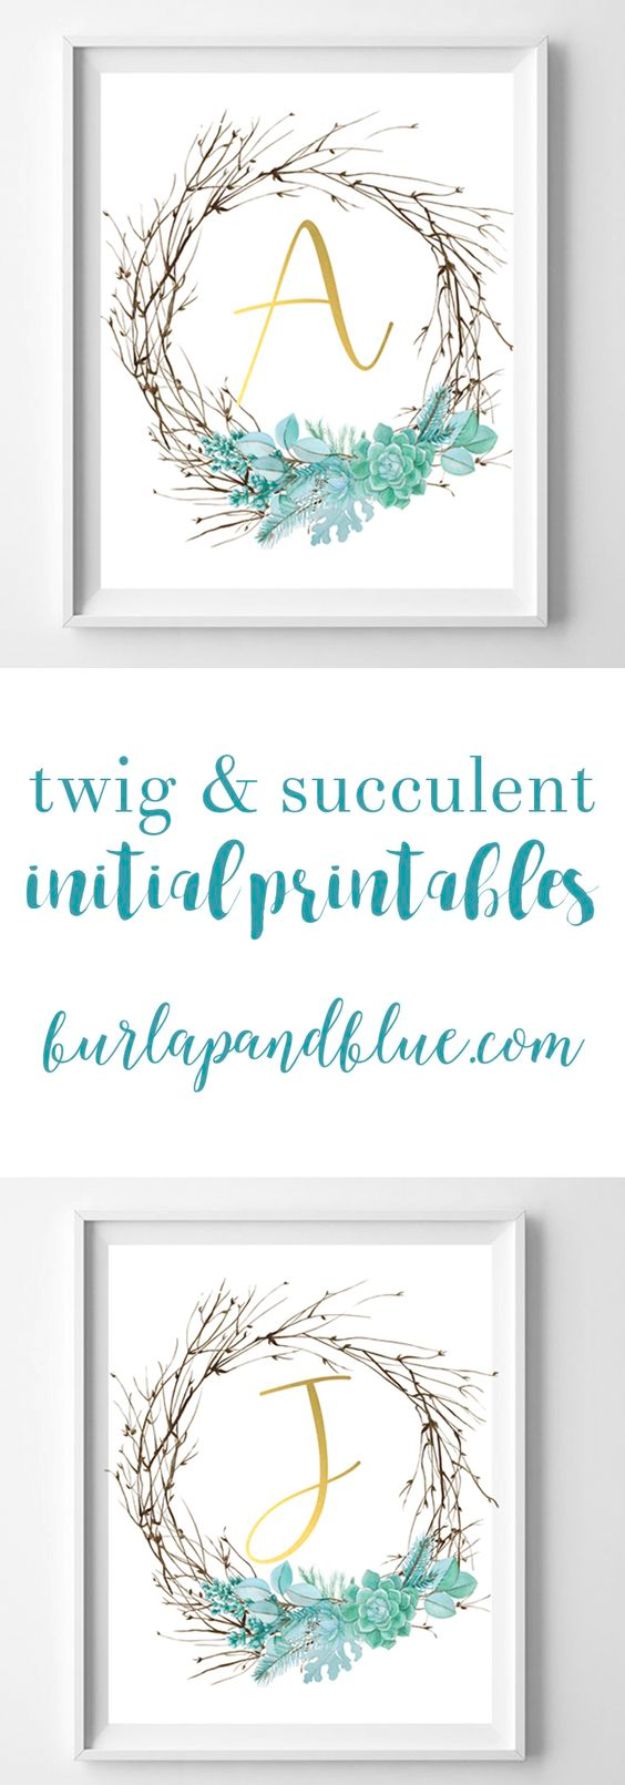 35-best-free-printables-for-your-walls